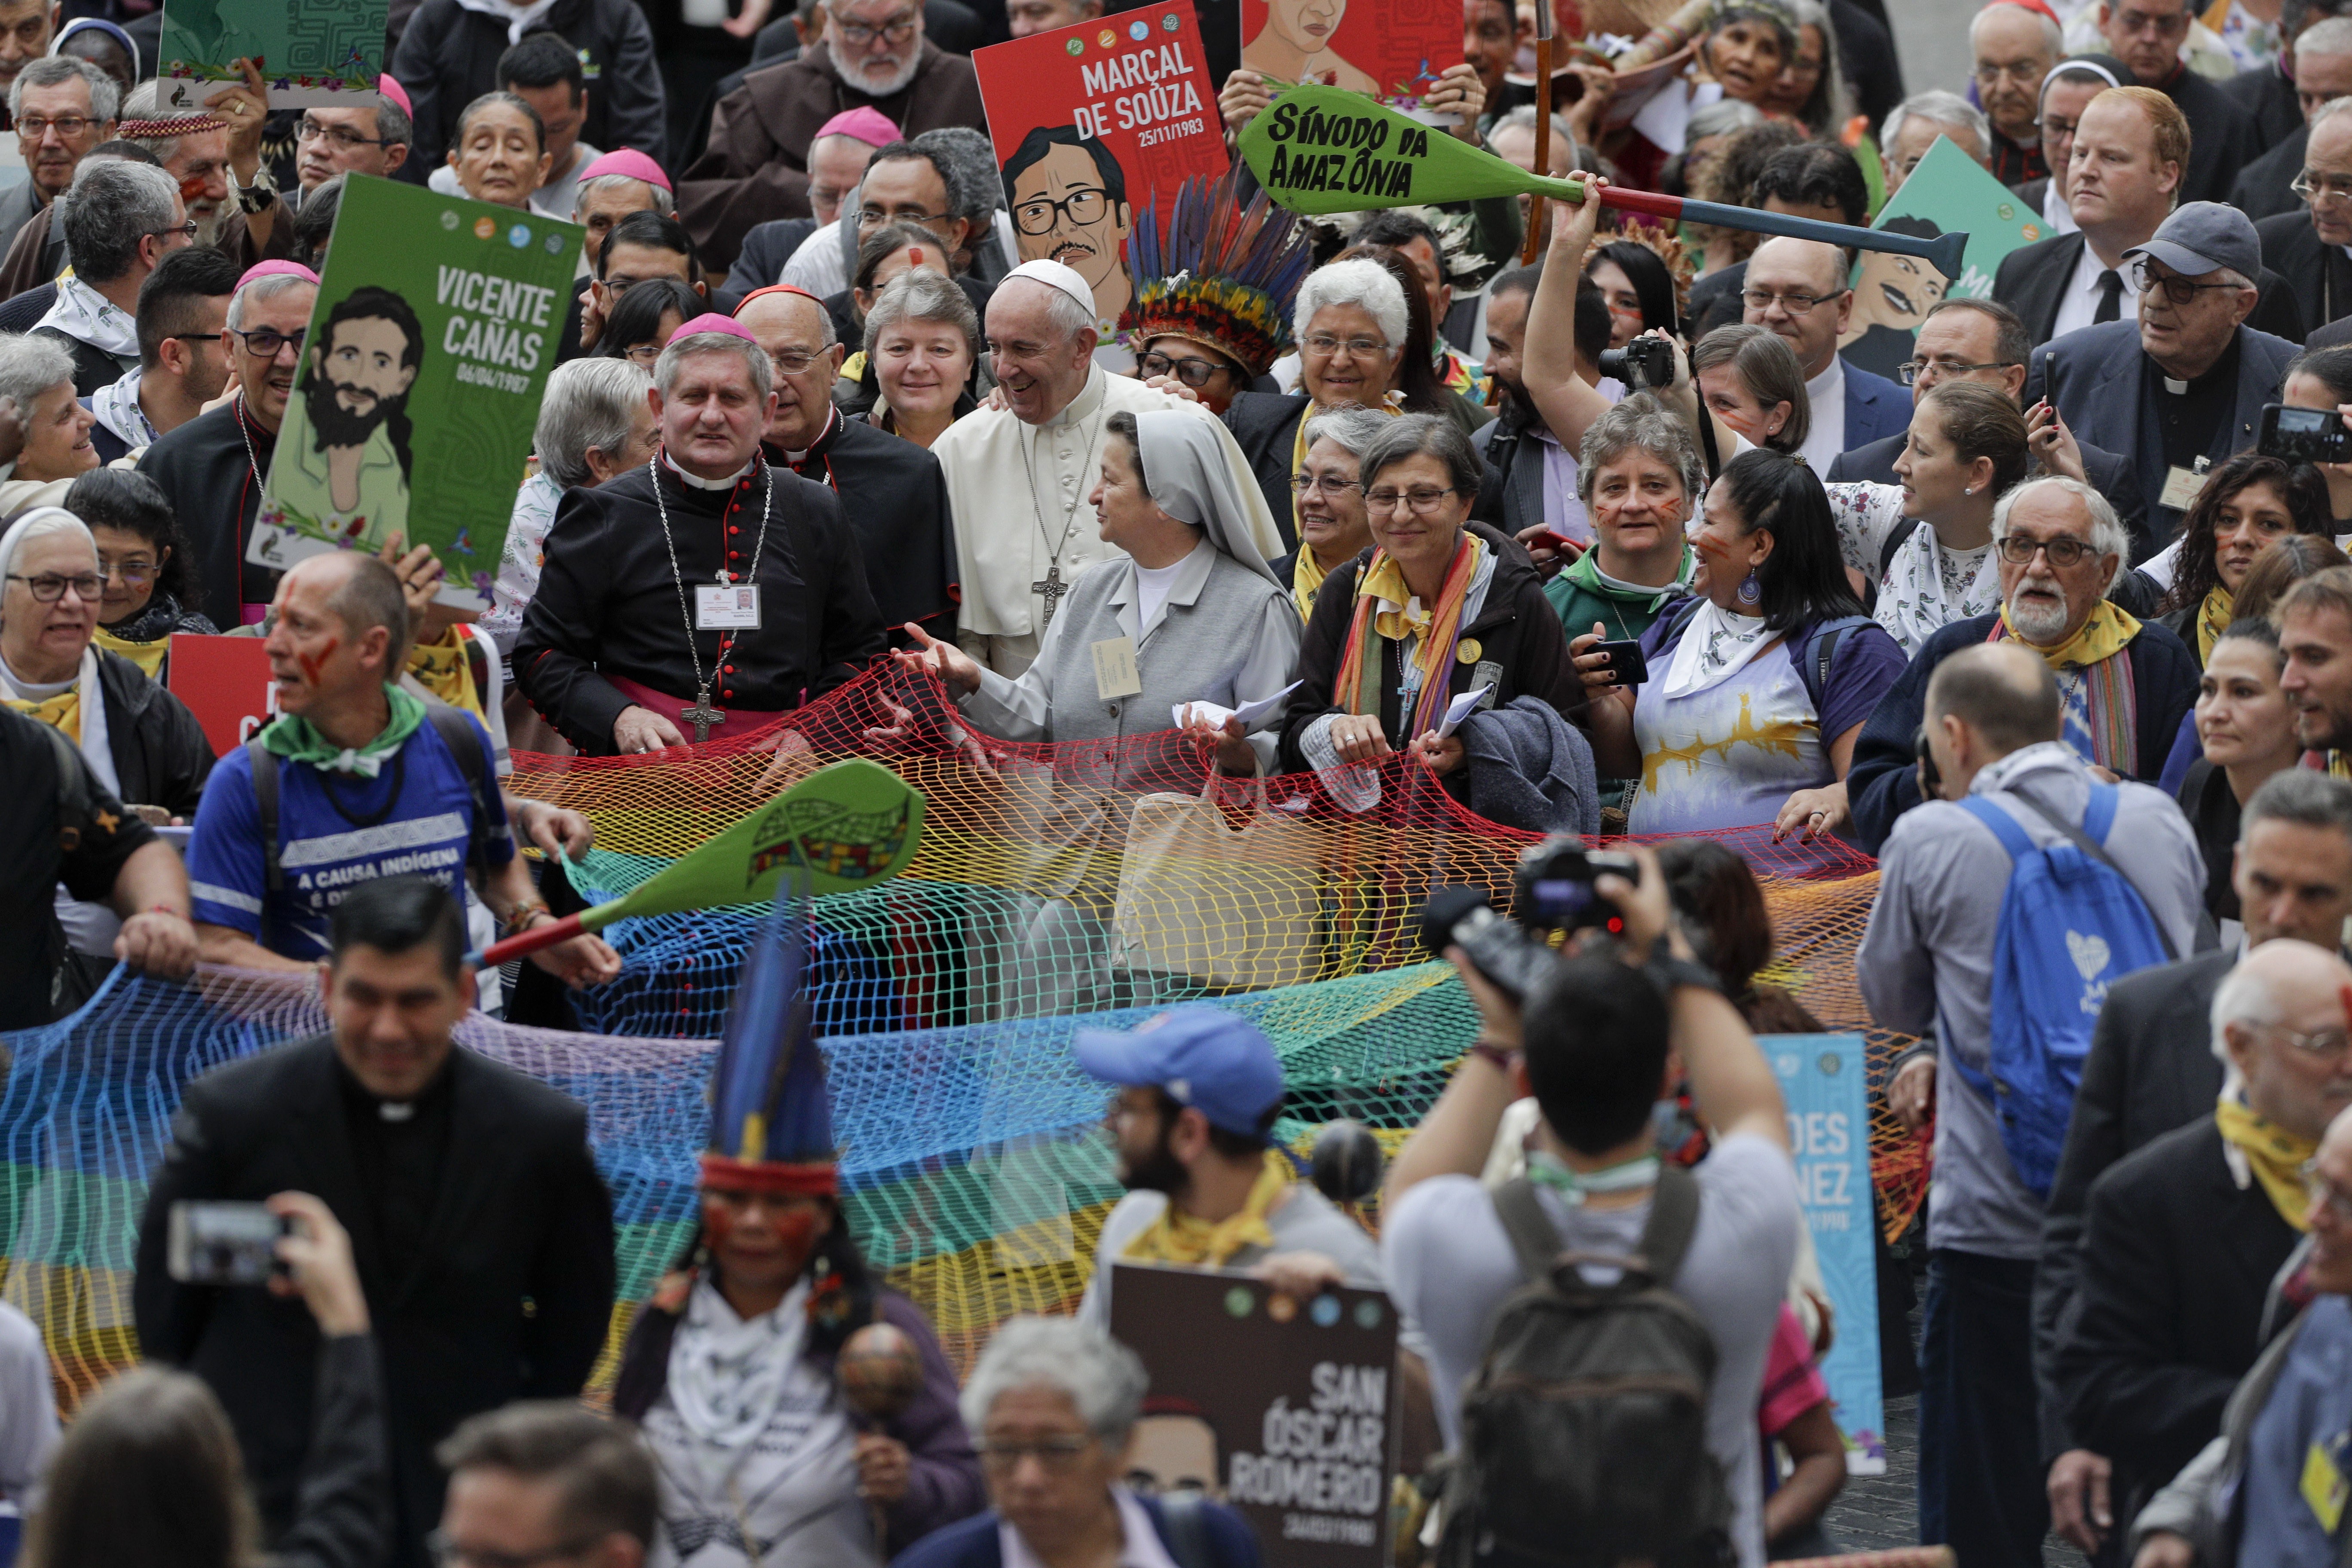 Pope Francis walks in procession on the occasion of the Amazon synod, at the Vatican, Monday, Oct. 7, 2019. Pope Francis opened a three-week meeting on preserving the rainforest and ministering to its native people as he fended off attacks from conservatives who are opposed to his ecological agenda. (AP Photo/Andrew Medichini)